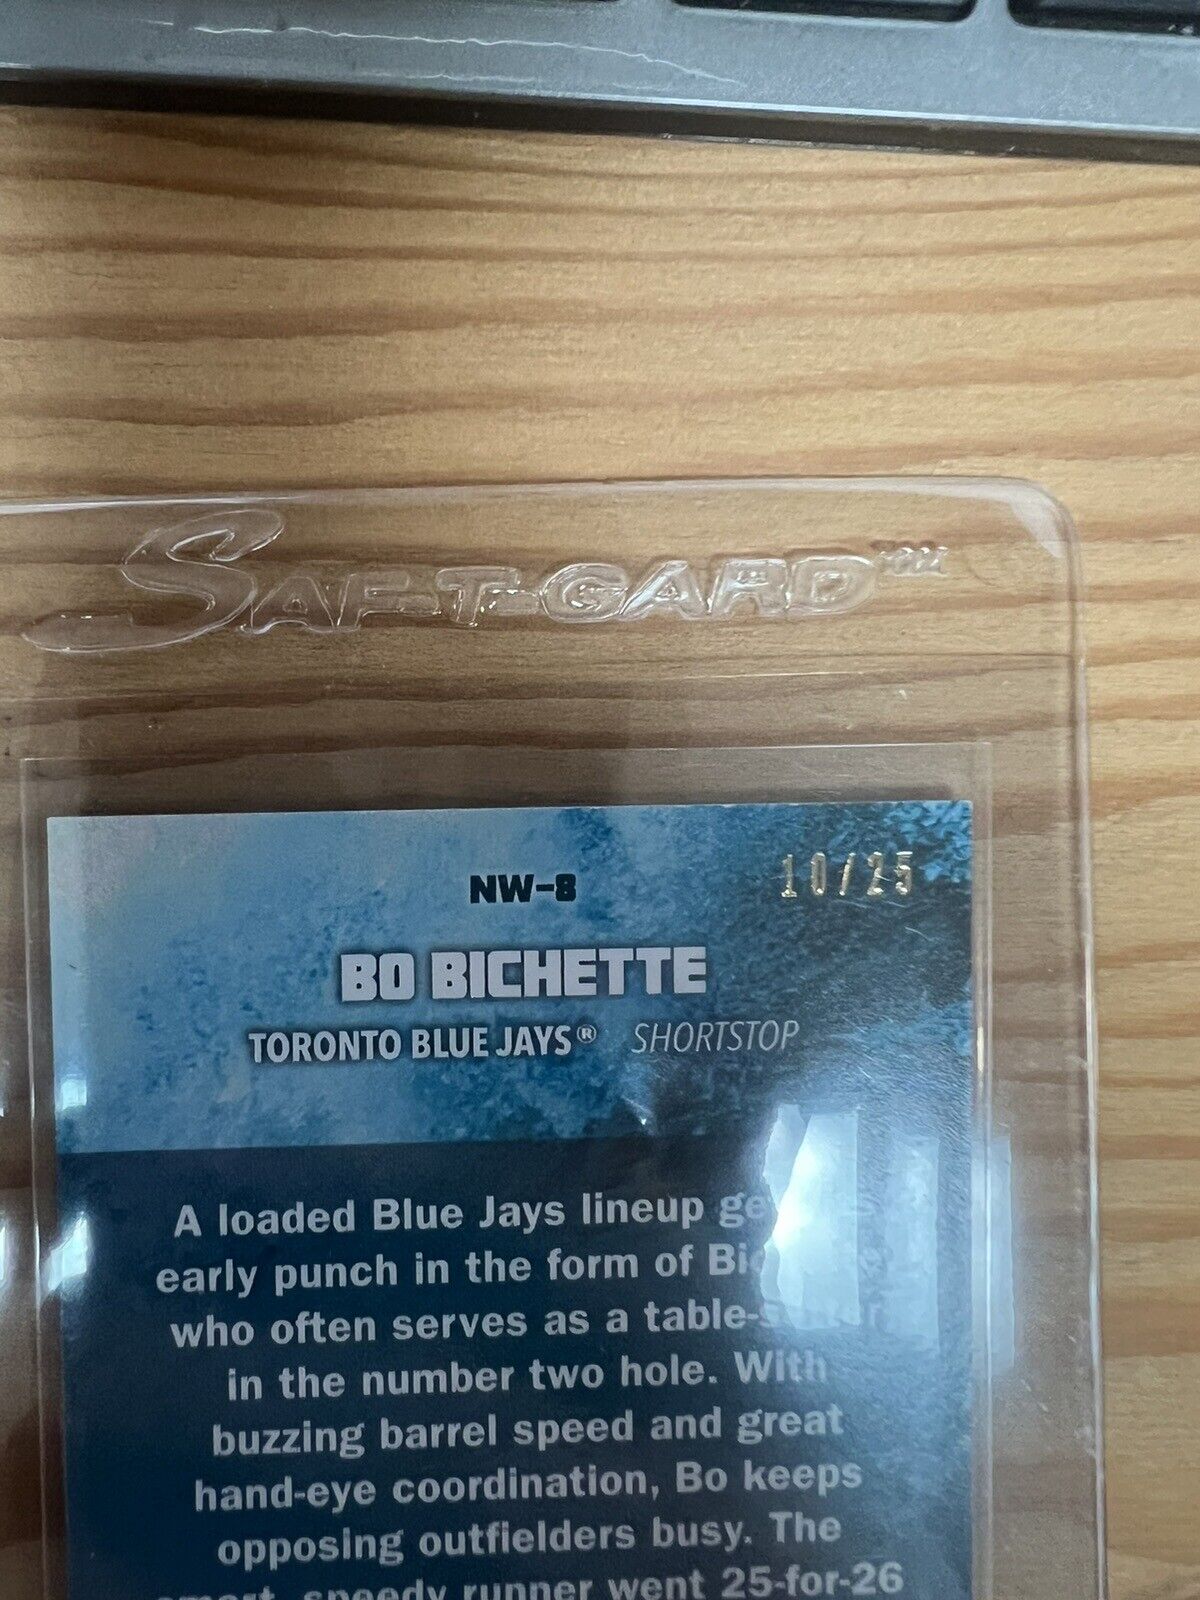 2022 Topps Gallery Next Wave Autograph Bo Bichette 25 Error NW8 Not NW6